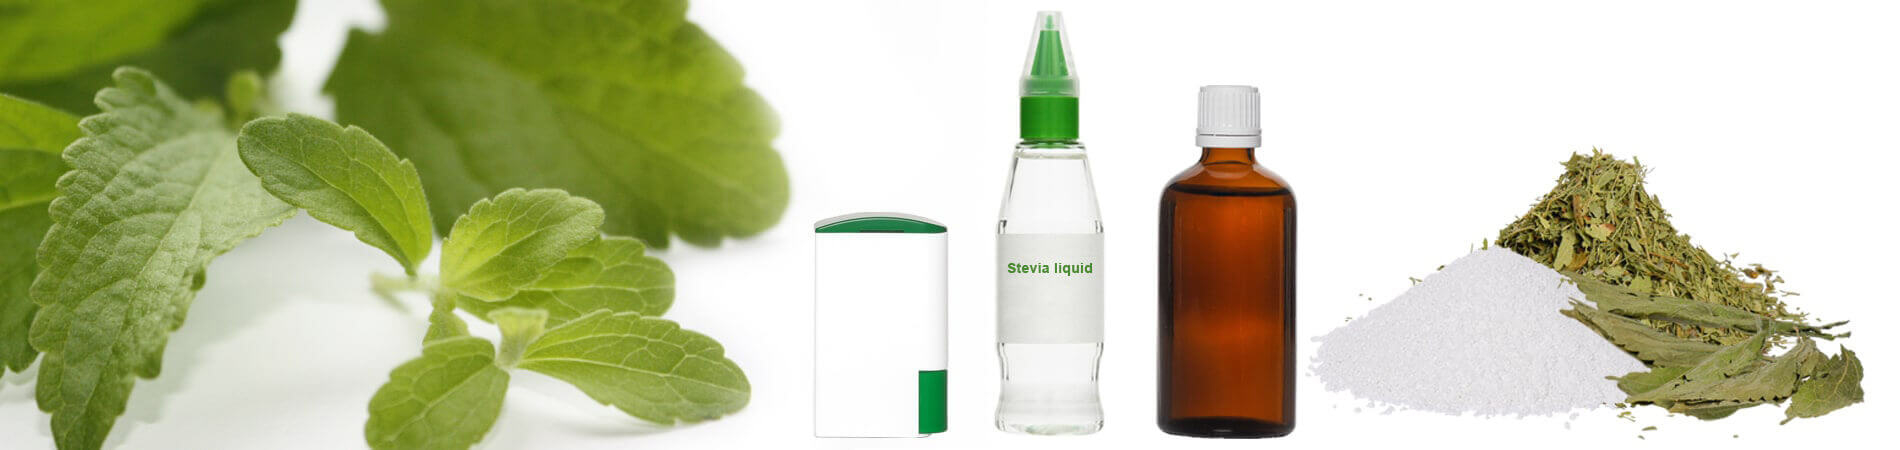 Buying Stevia | What to look for when buying Stevia